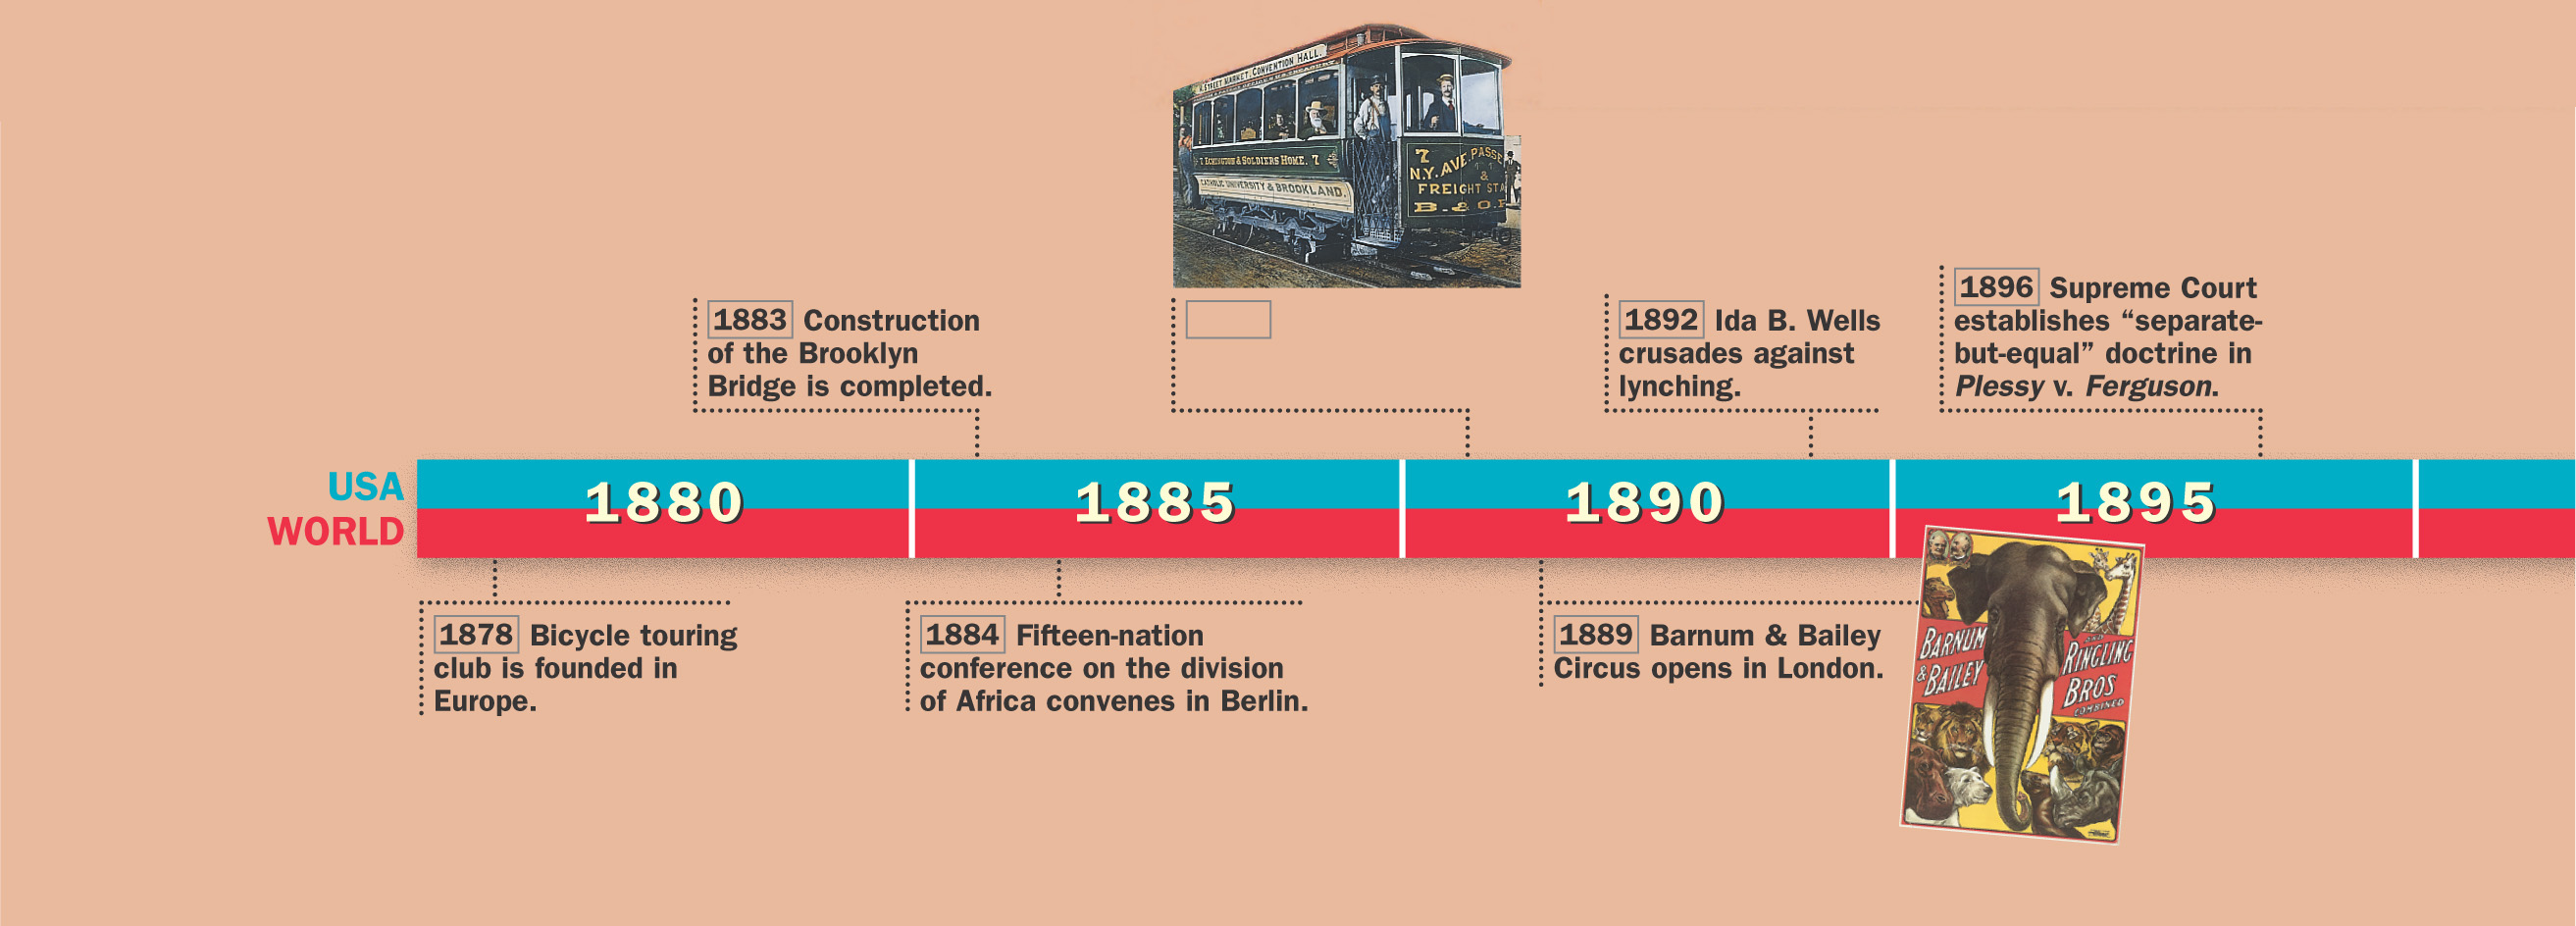 A timeline of historical events from 1878 to 1916 in both the U.S. and the world